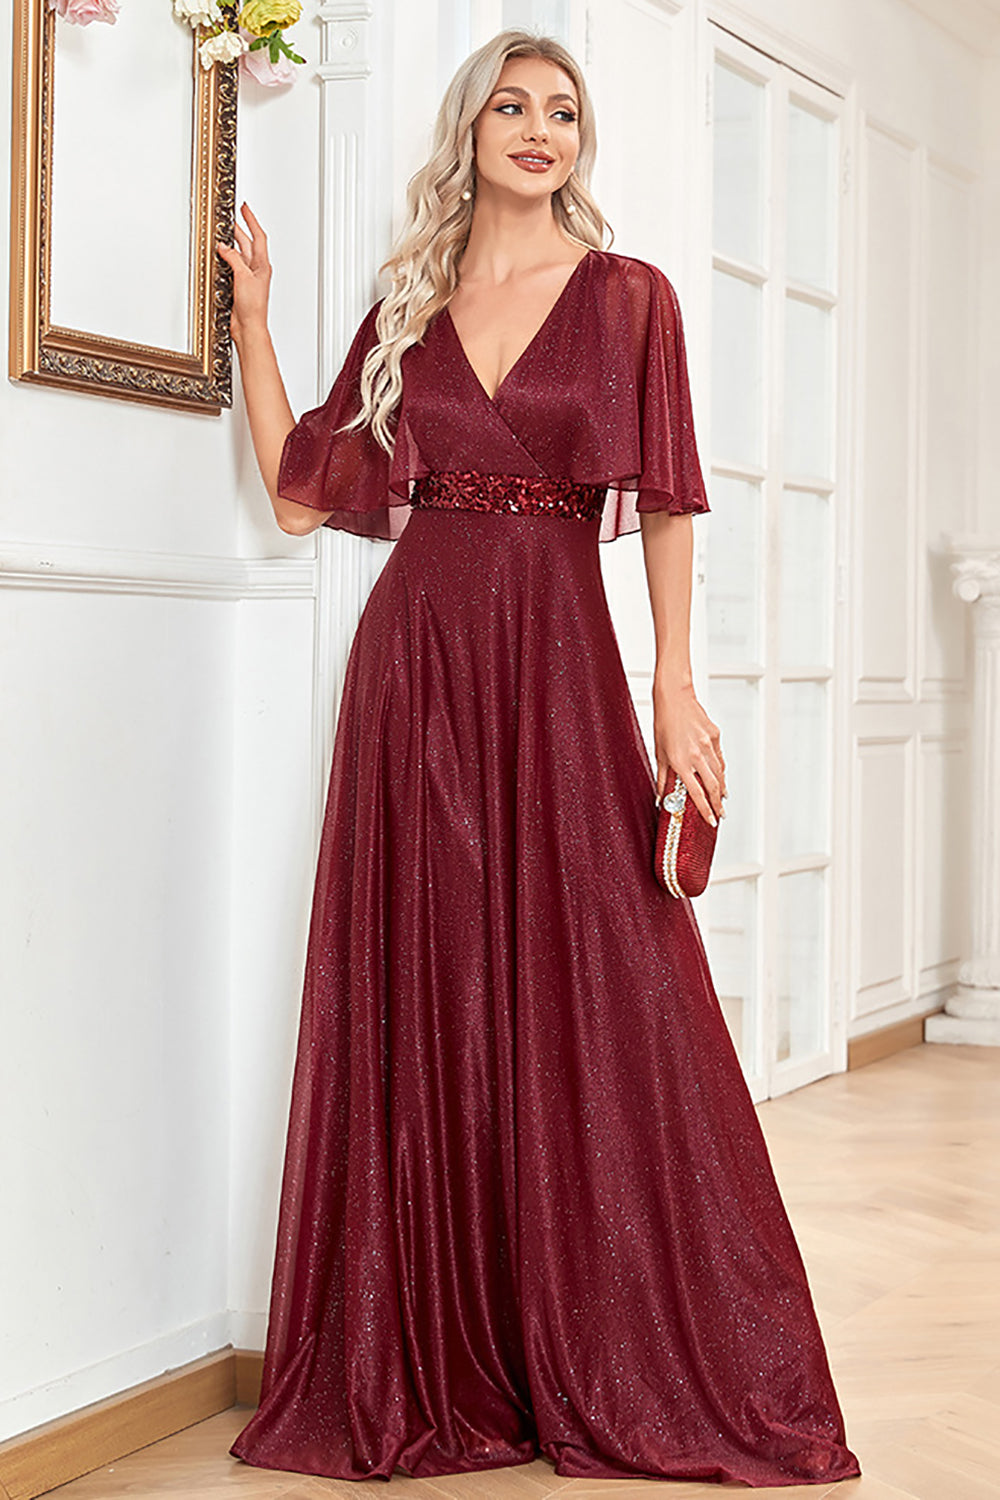 Burgundy A Line V Neck Shiny Chiffon Long Dress For Mom With Batwing Sleeves